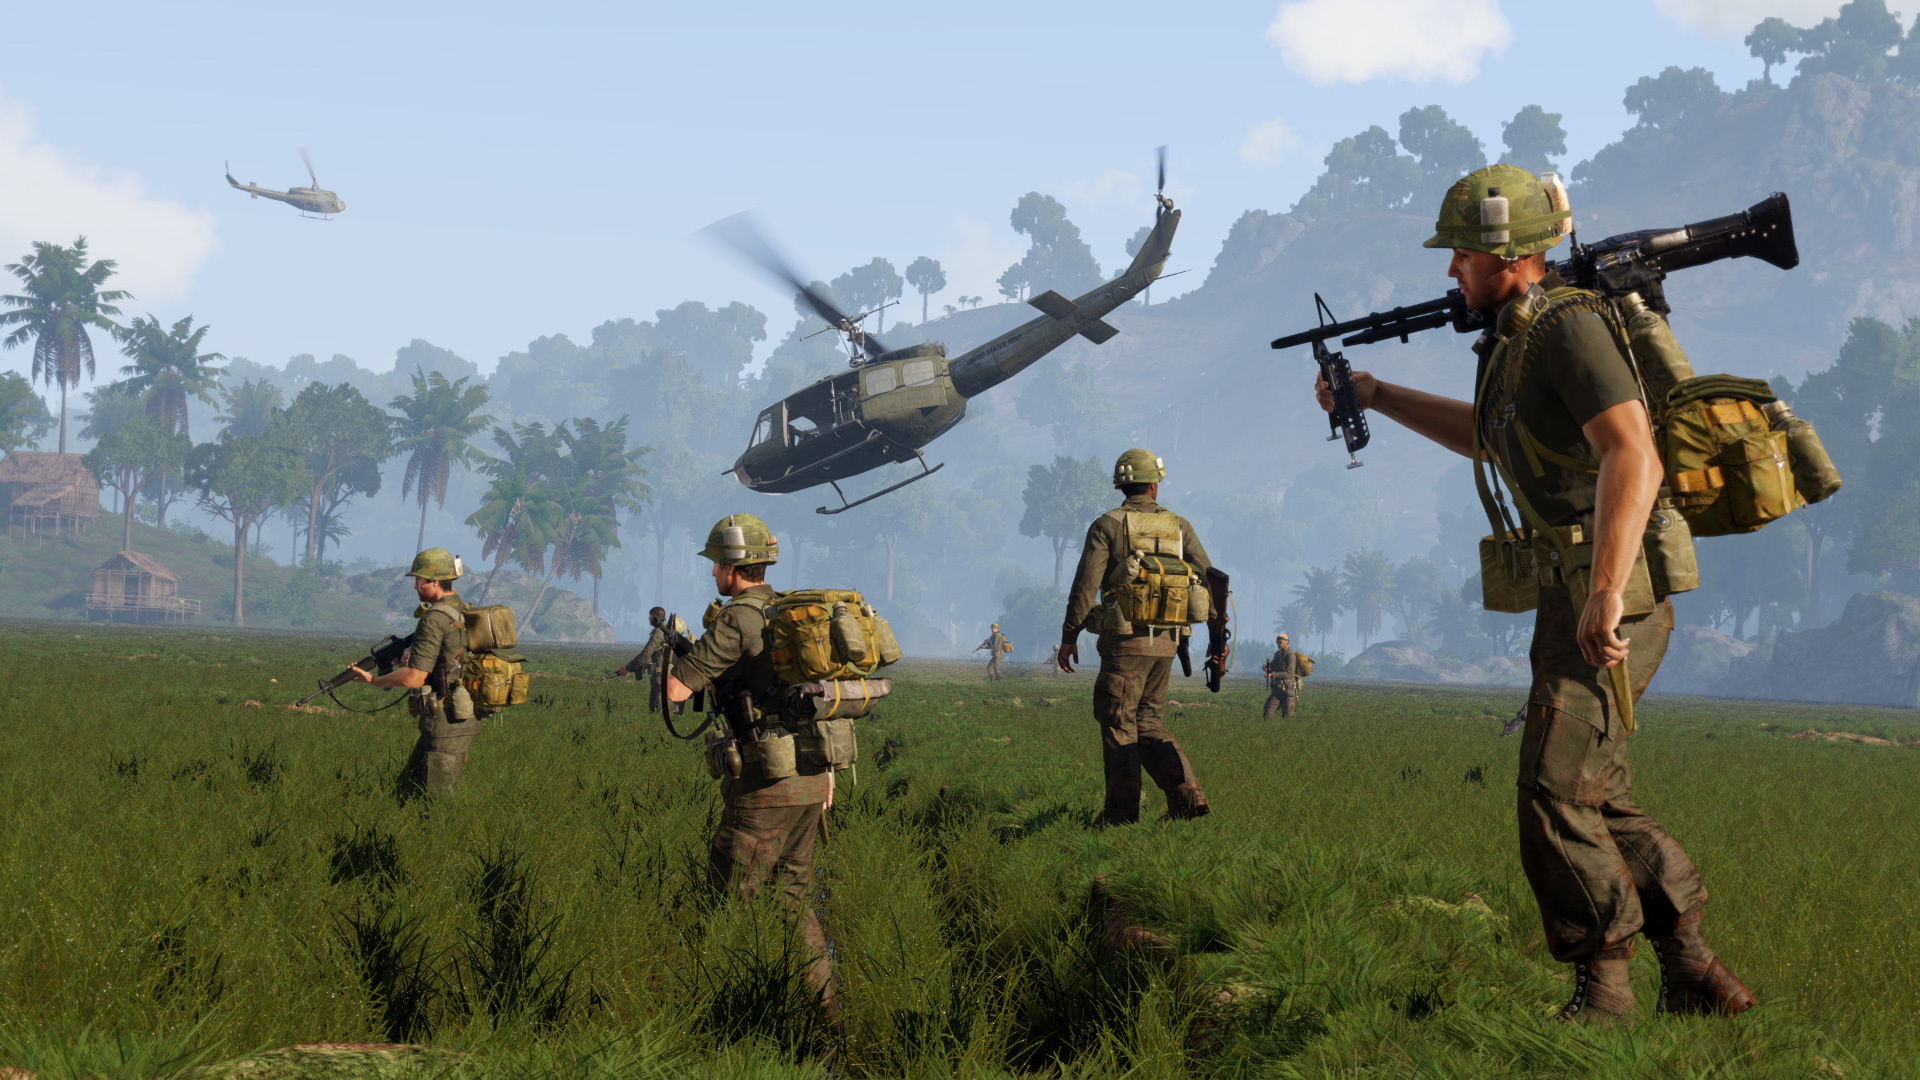 ARMA 3 WARLORDS UPDATE IS LIVE, News, Arma 3